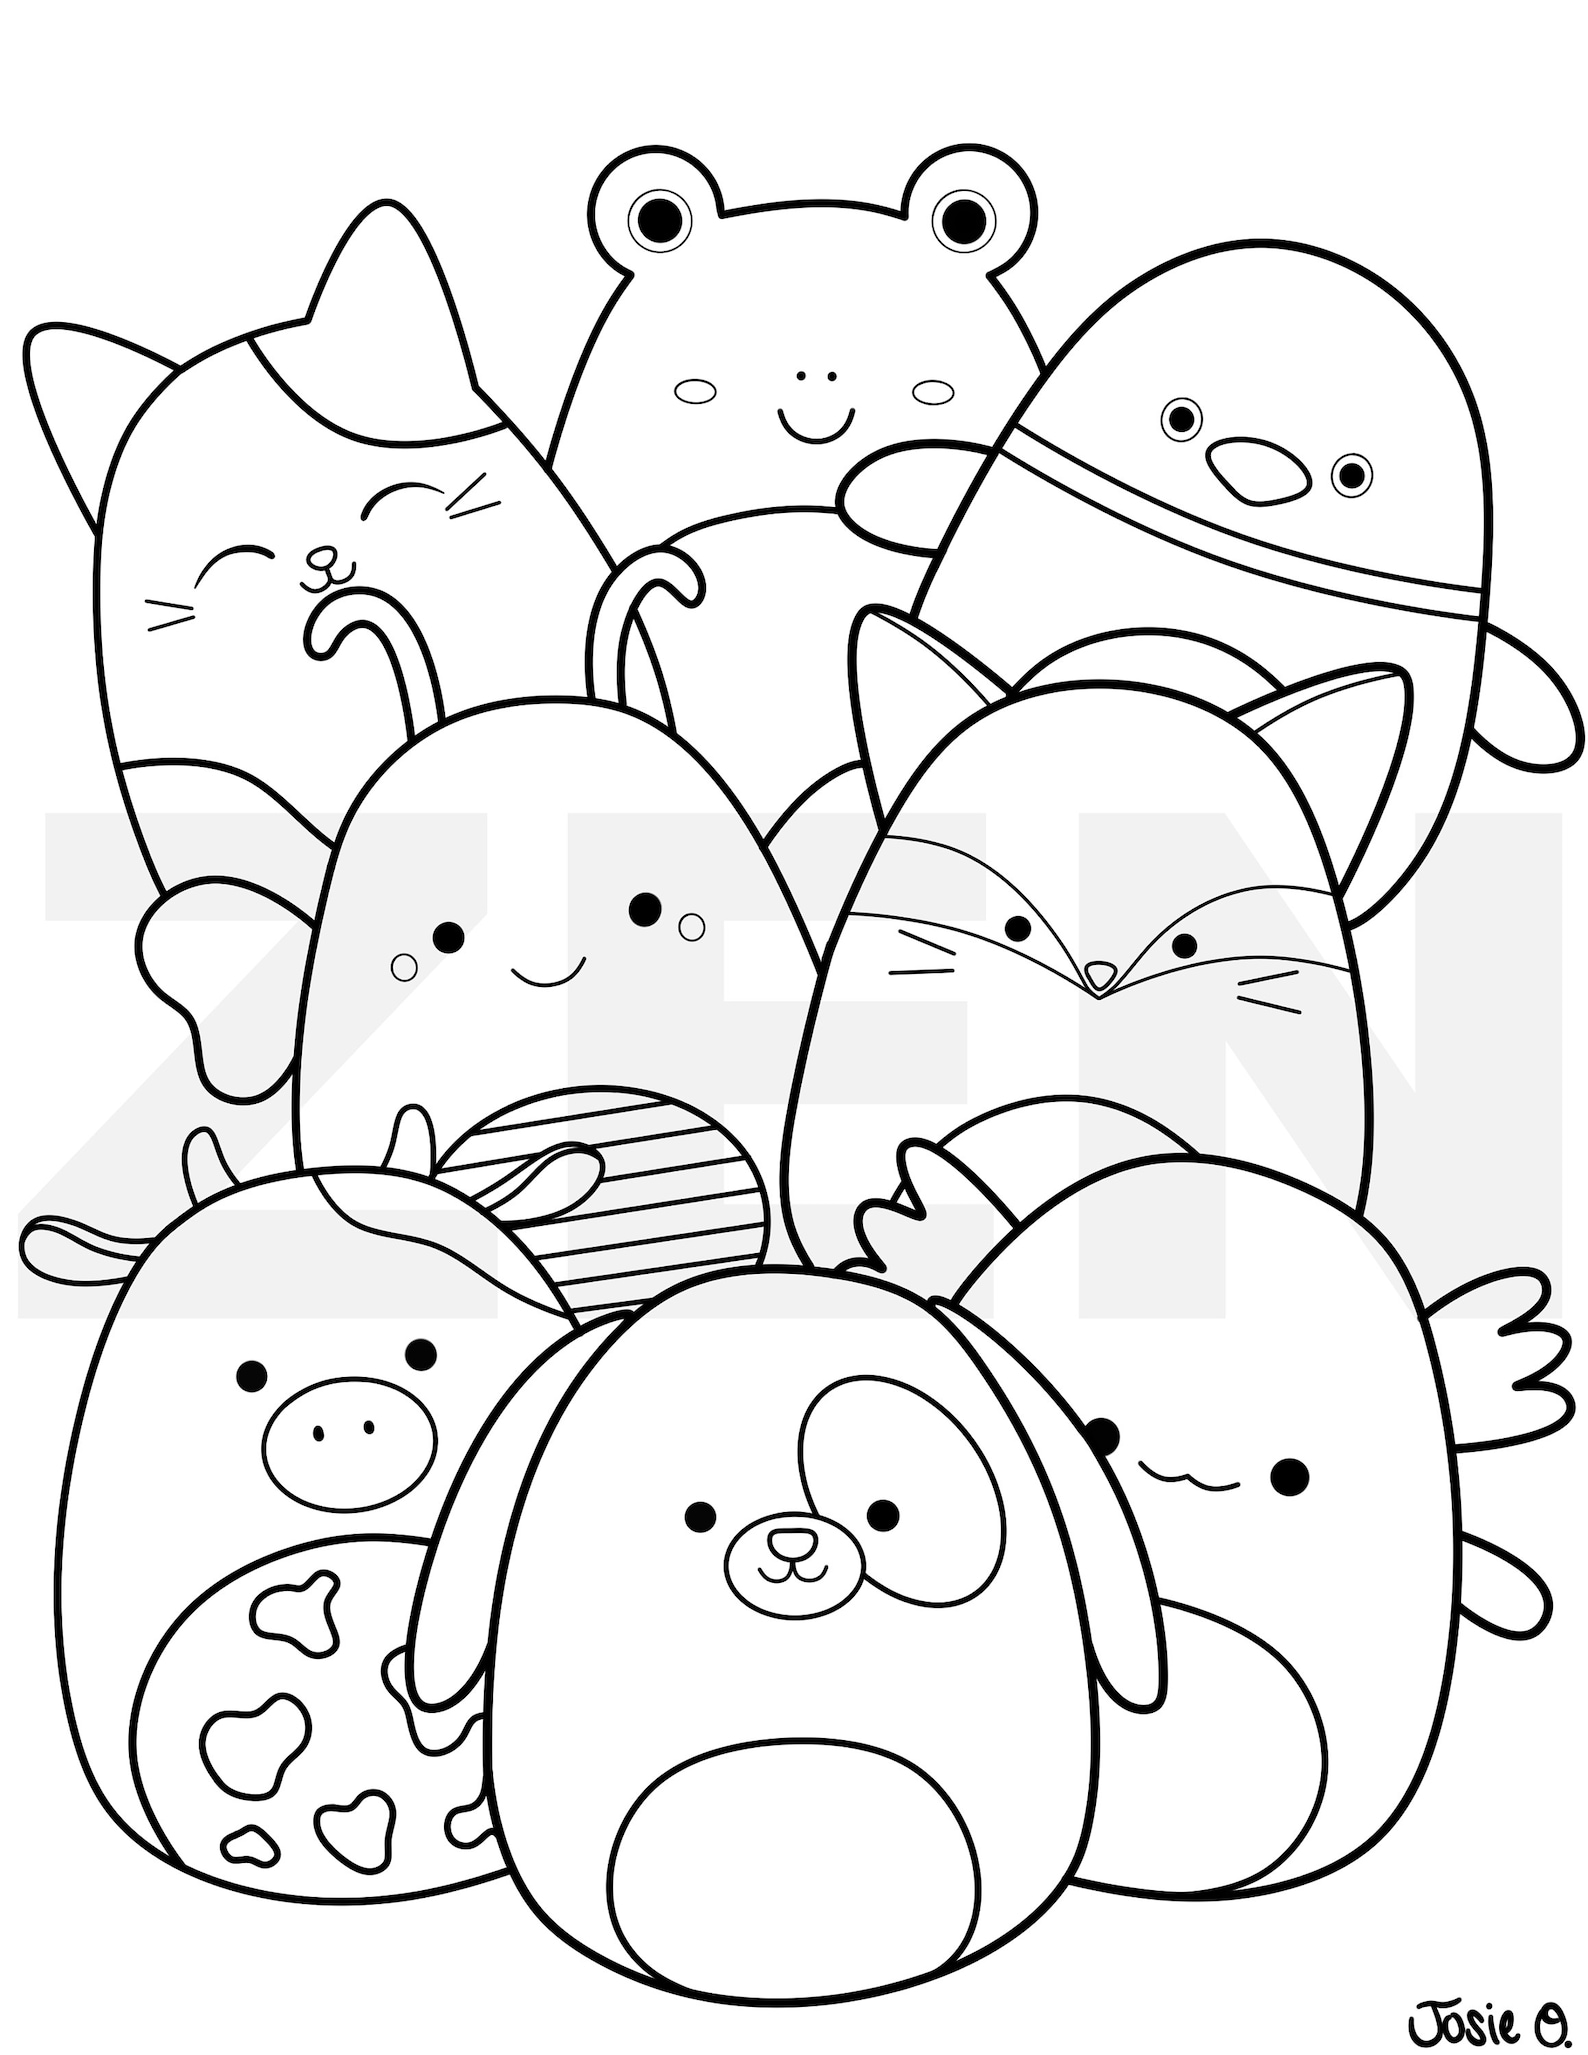 Printable Squishmallow Coloring Page for kids.